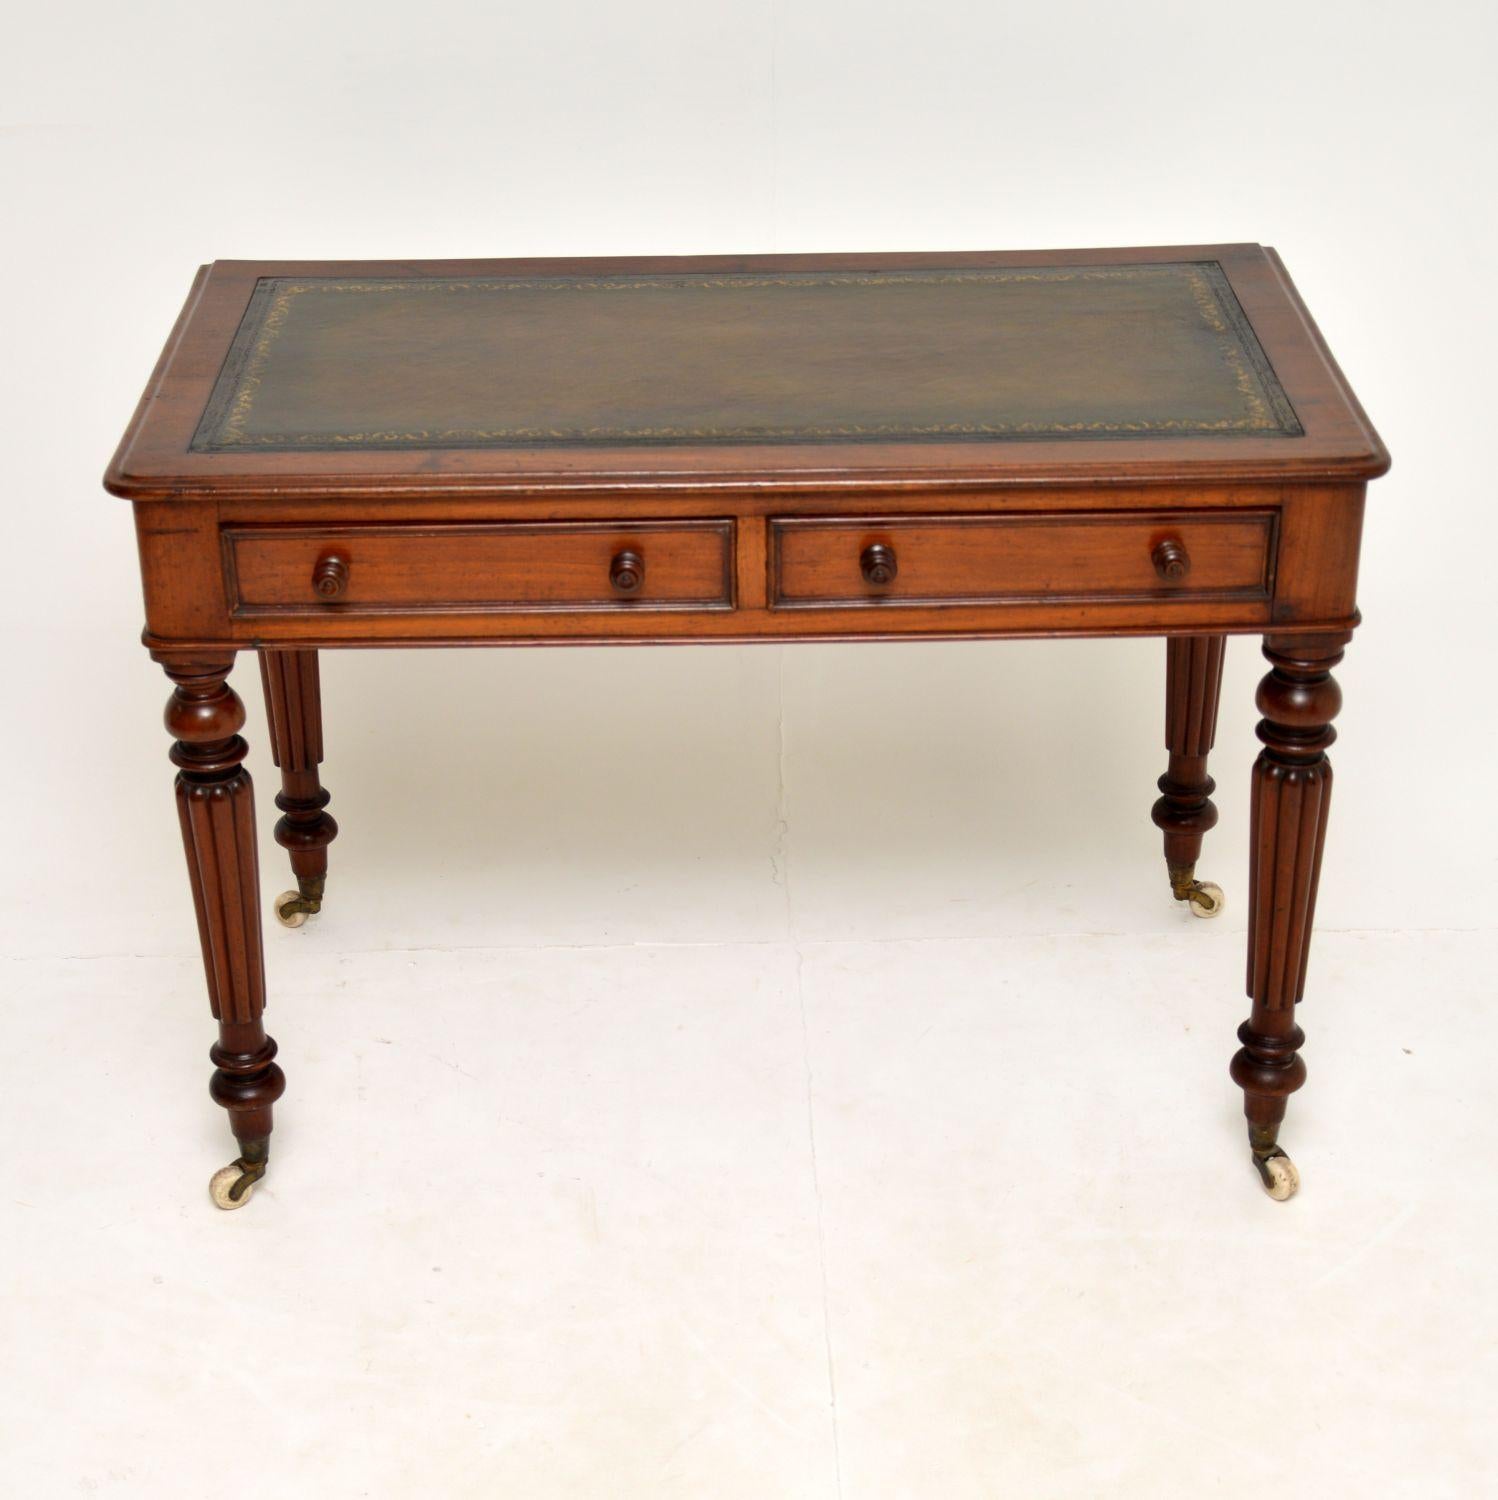 An excellent Victorian leather top writing table in mahogany. This dates from around the 1840-60’s period.
This desk is of super quality & beautifully made from solid mahogany. It has well turned and fluted legs, terminating in original white